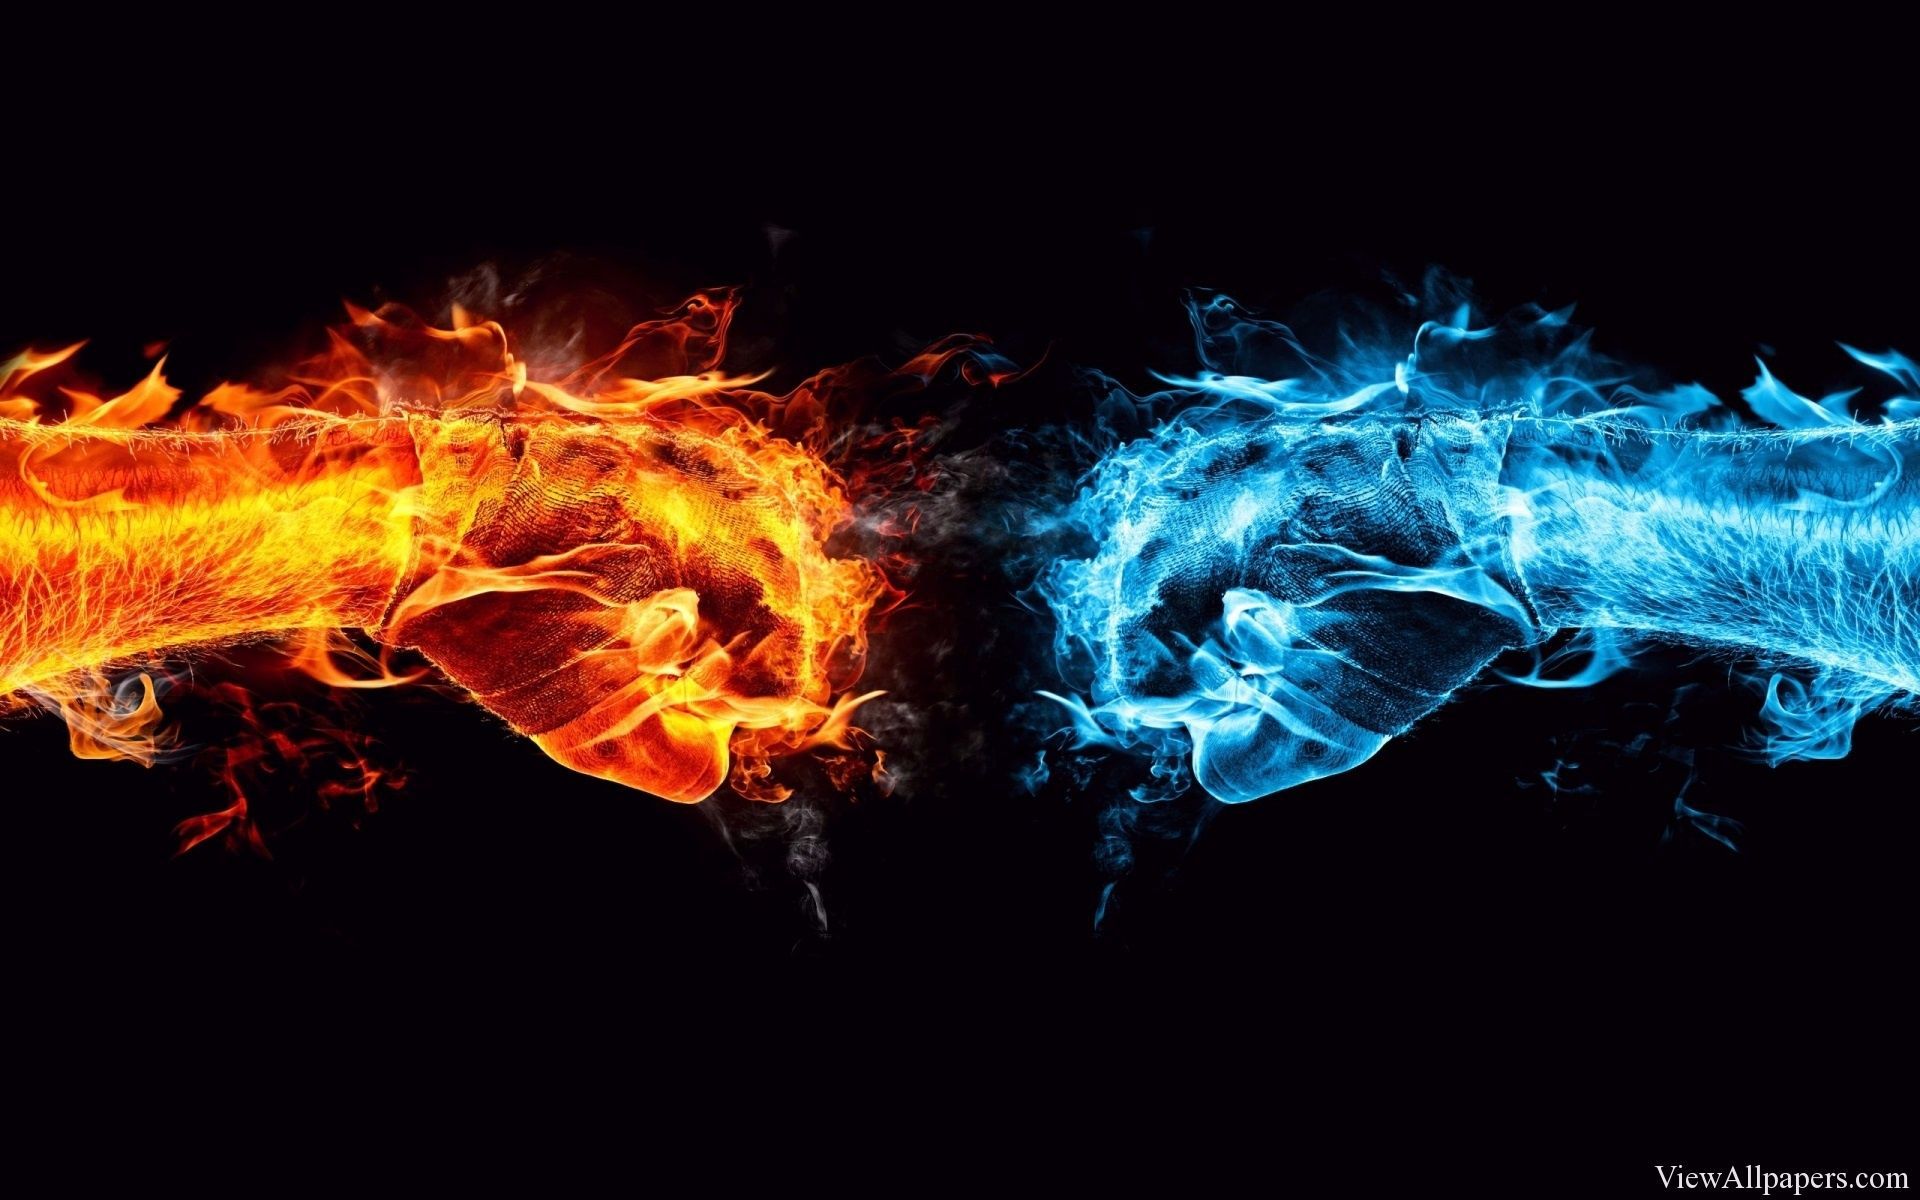 Hot And Cold Conflict 3DD & Abstract HD Wallpaper. Cool desktop, Cool desktop wallpaper, Fire art